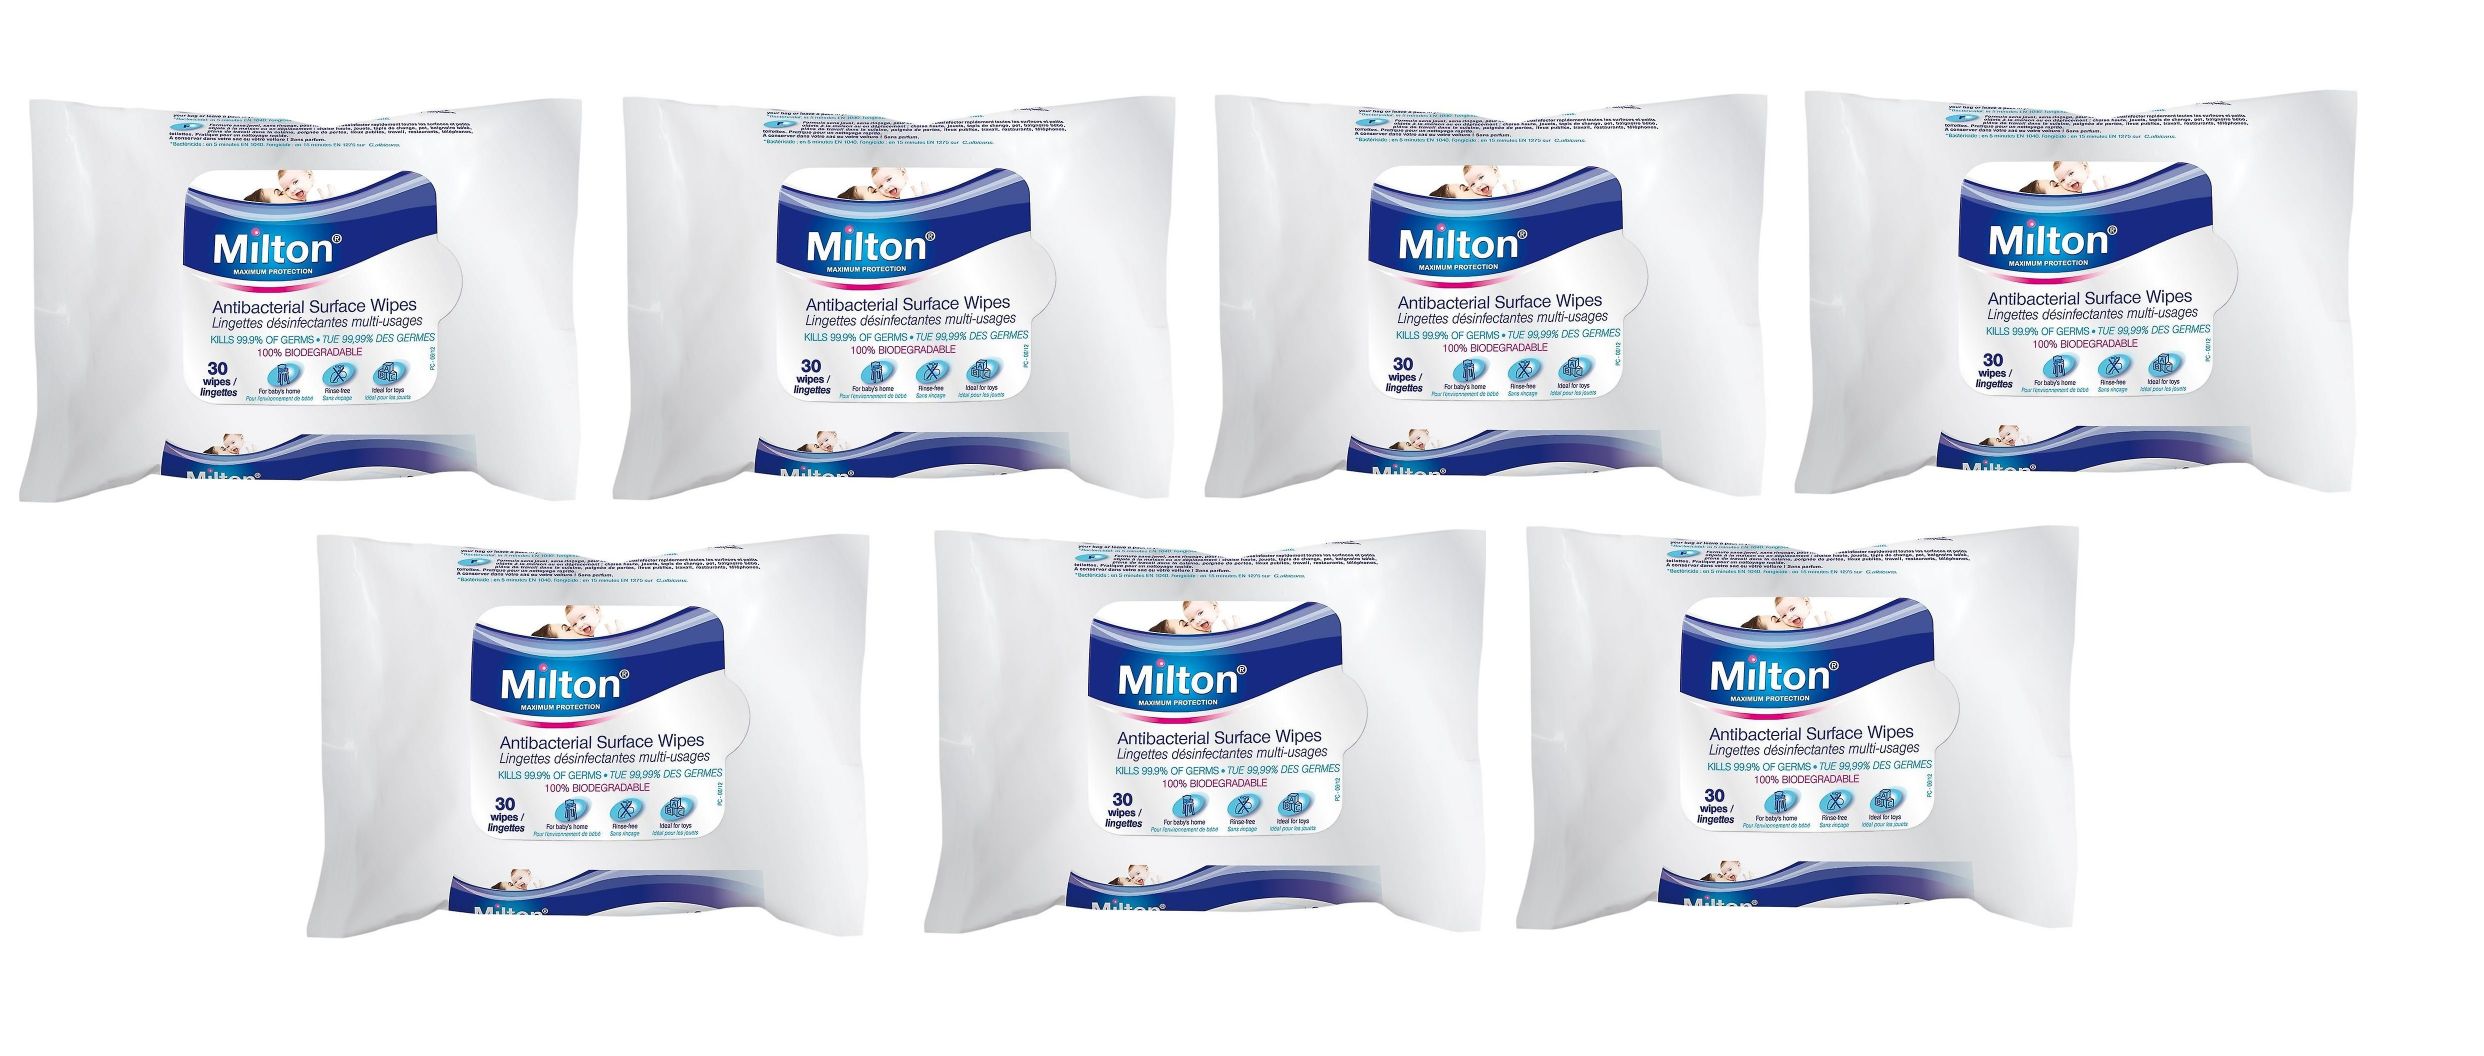 MILTON Antibacterial Surface Wipes (30s) - Pack of 7